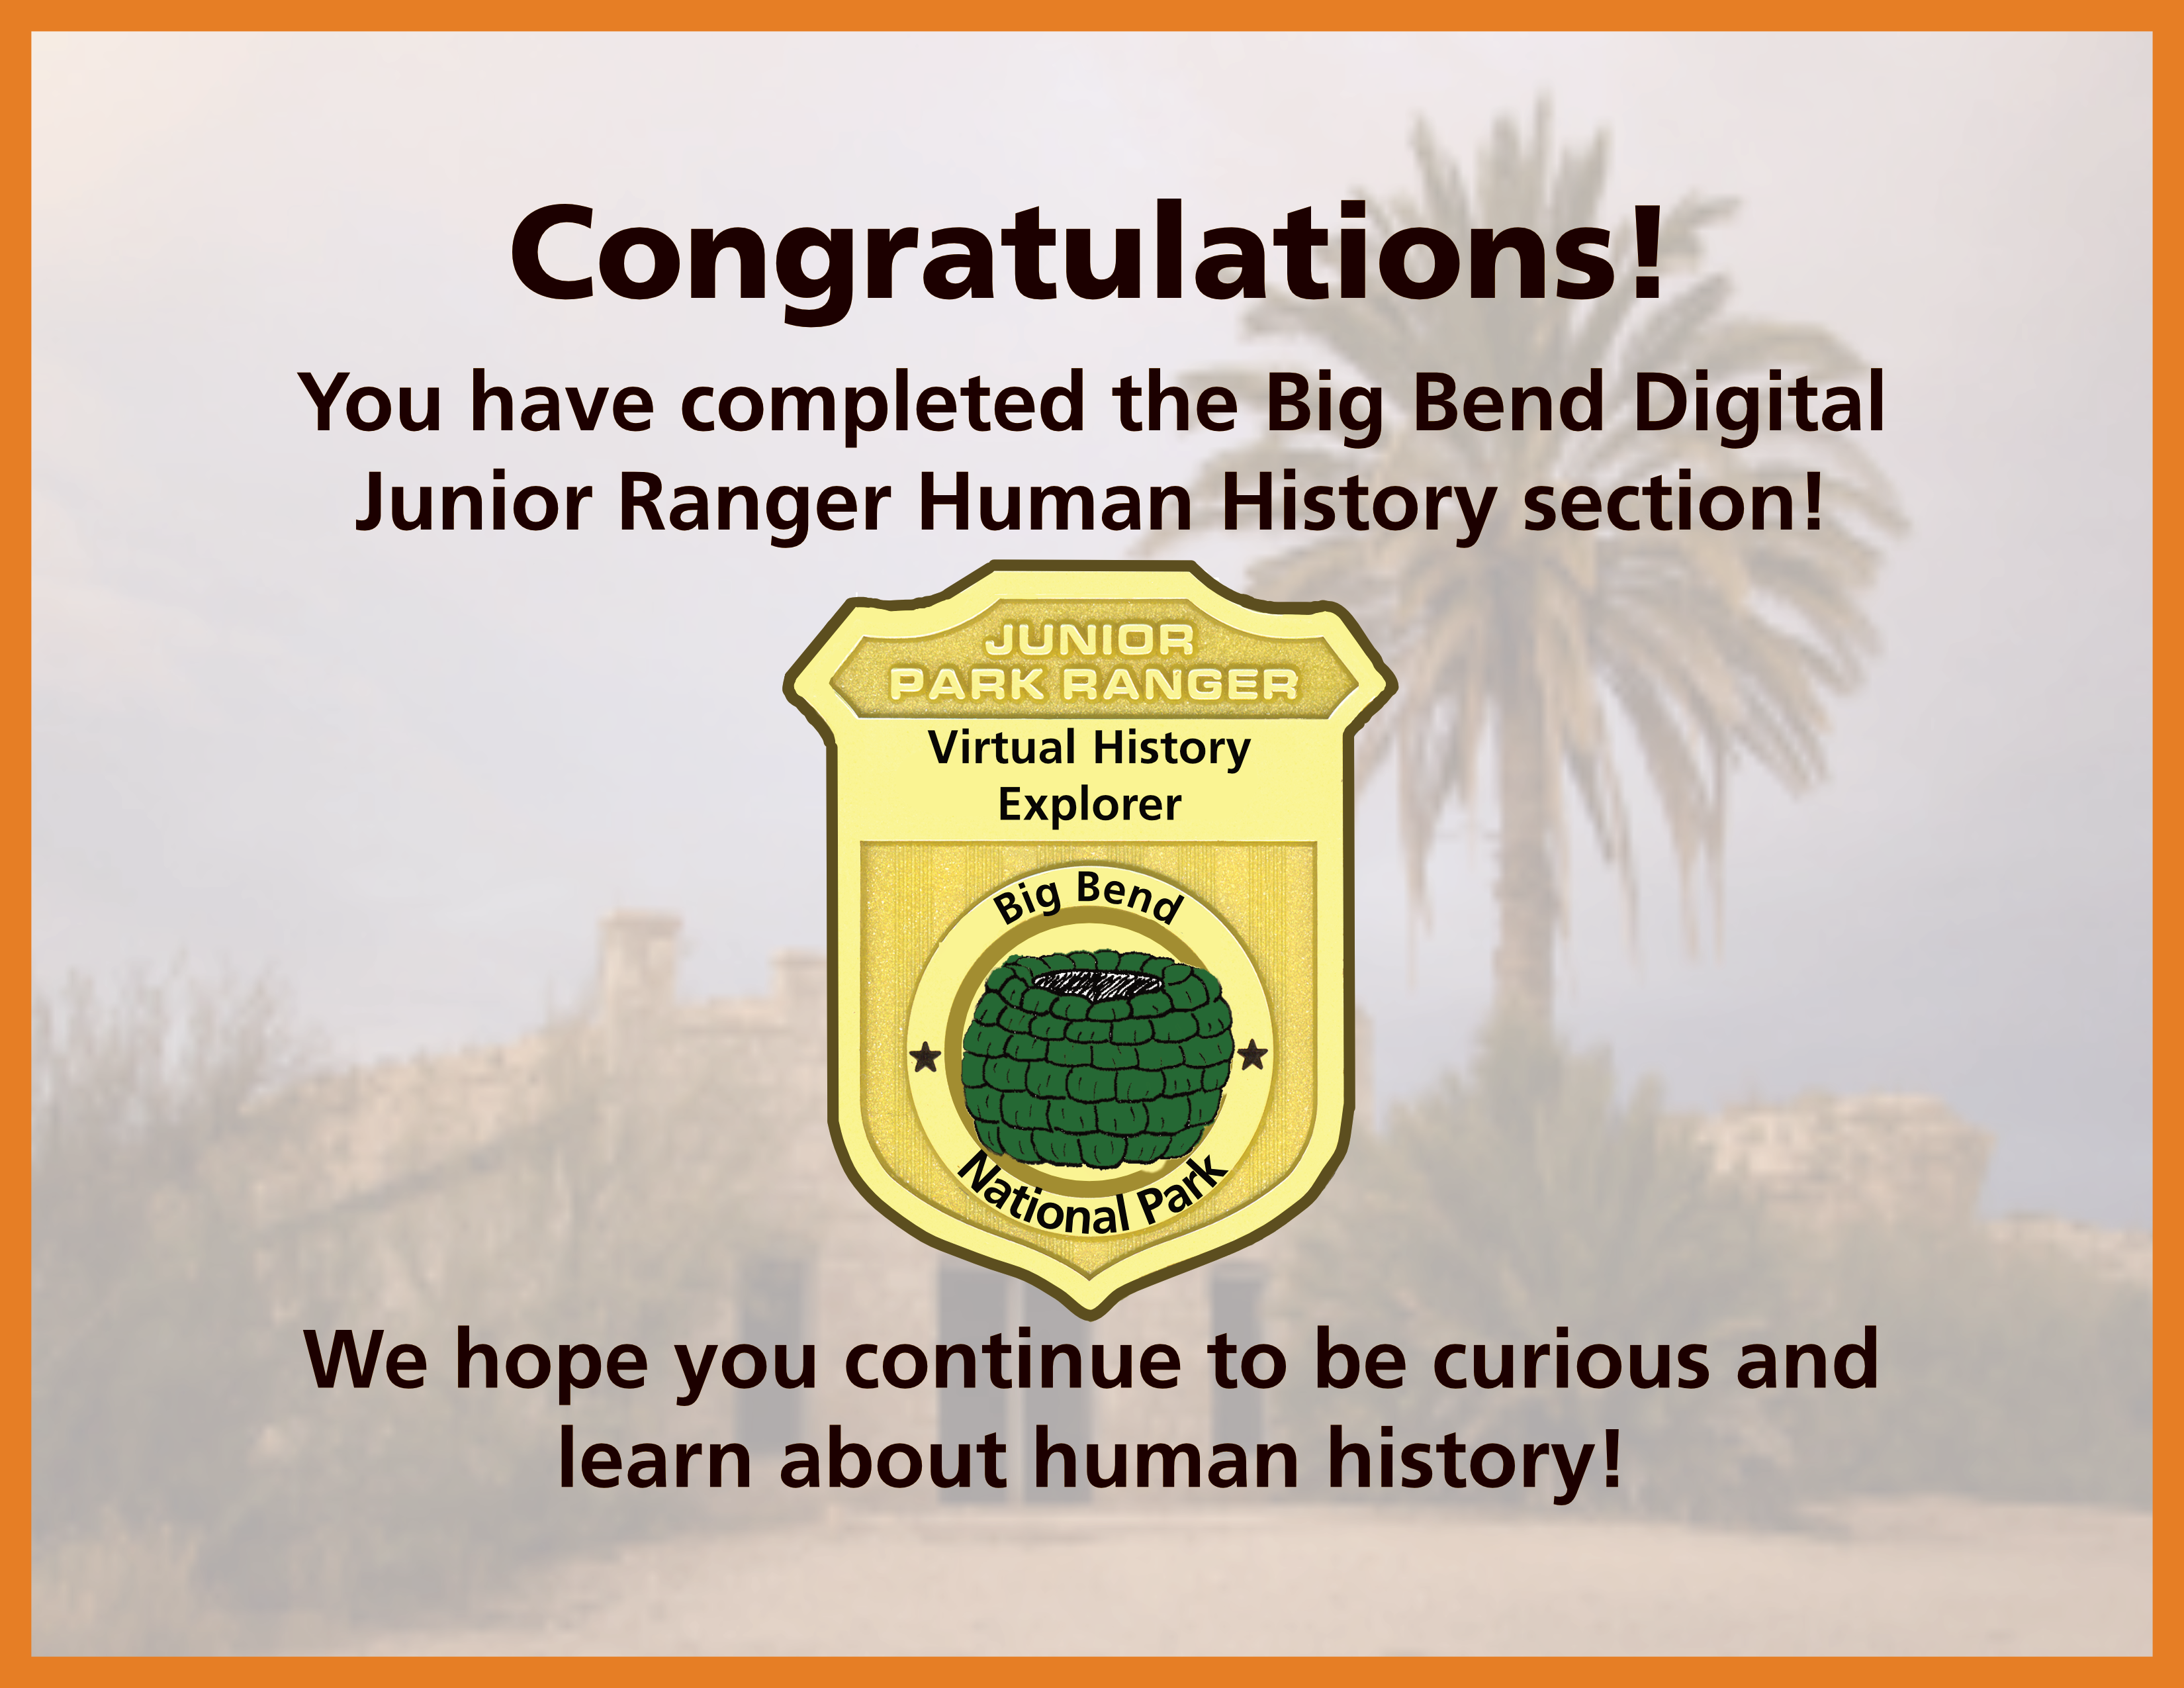 A certificate of completion with a junior ranger badge in the center. The background has an image of an old adobe building surrounded by palm trees and other plants. The badge has a woven basket in the middle of it.